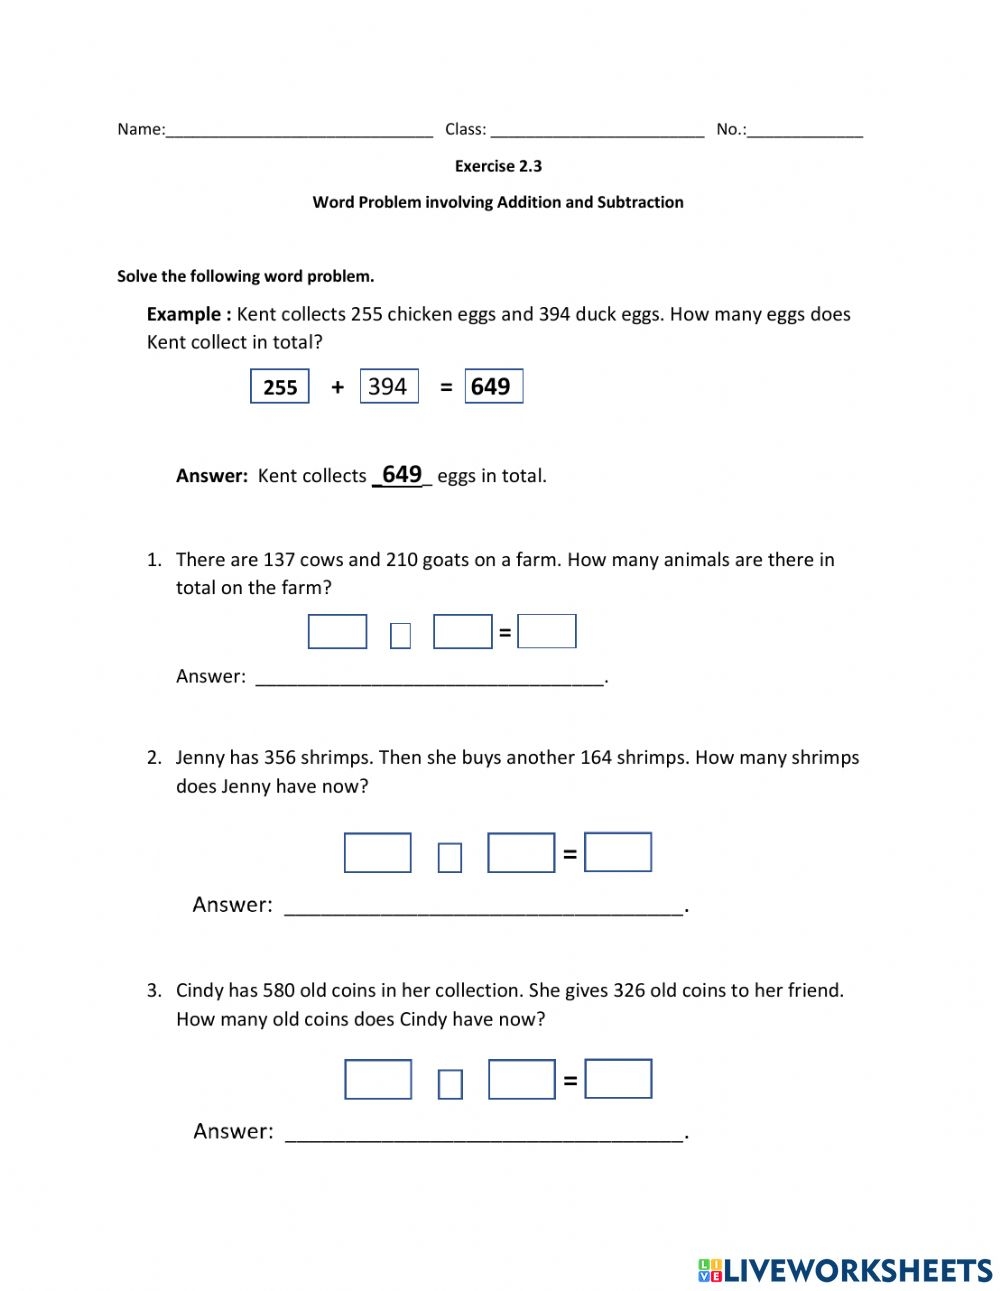 addition-and-subtraction-word-problems-interactive-activity-math-worksheet-answers